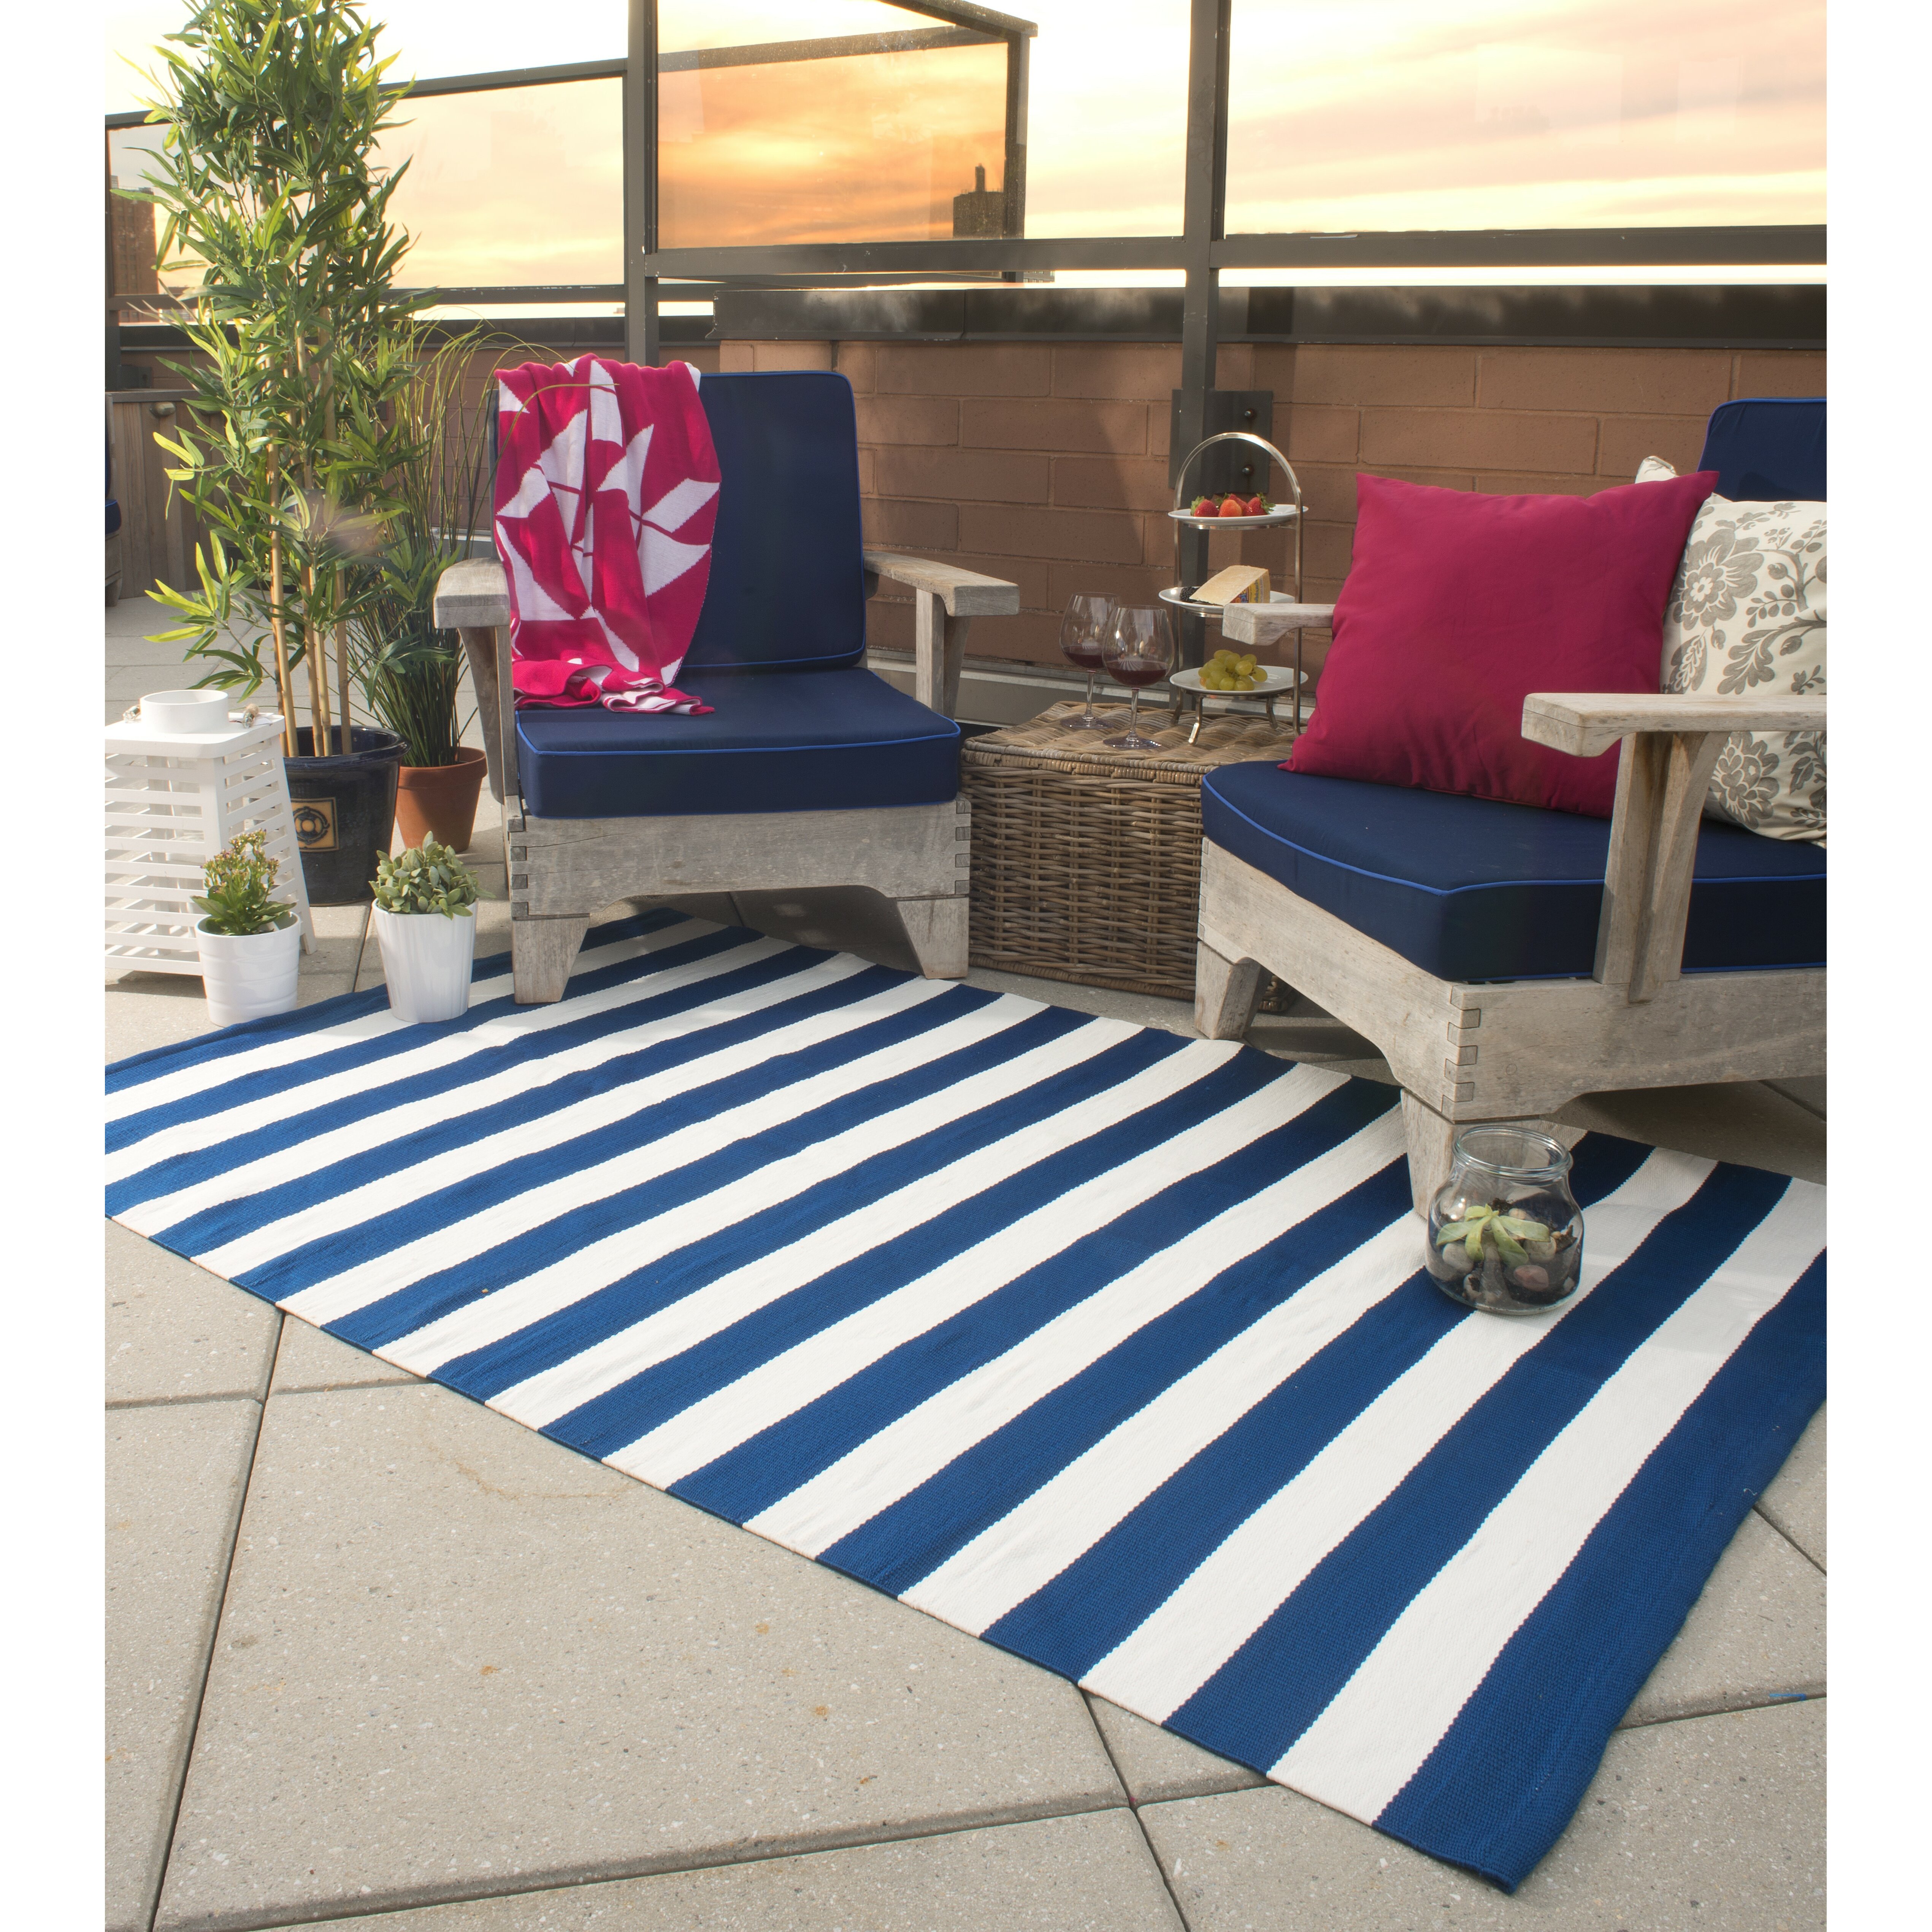 Fab Rugs Nantucket Striped Blue & White Indoor/Outdoor ...
